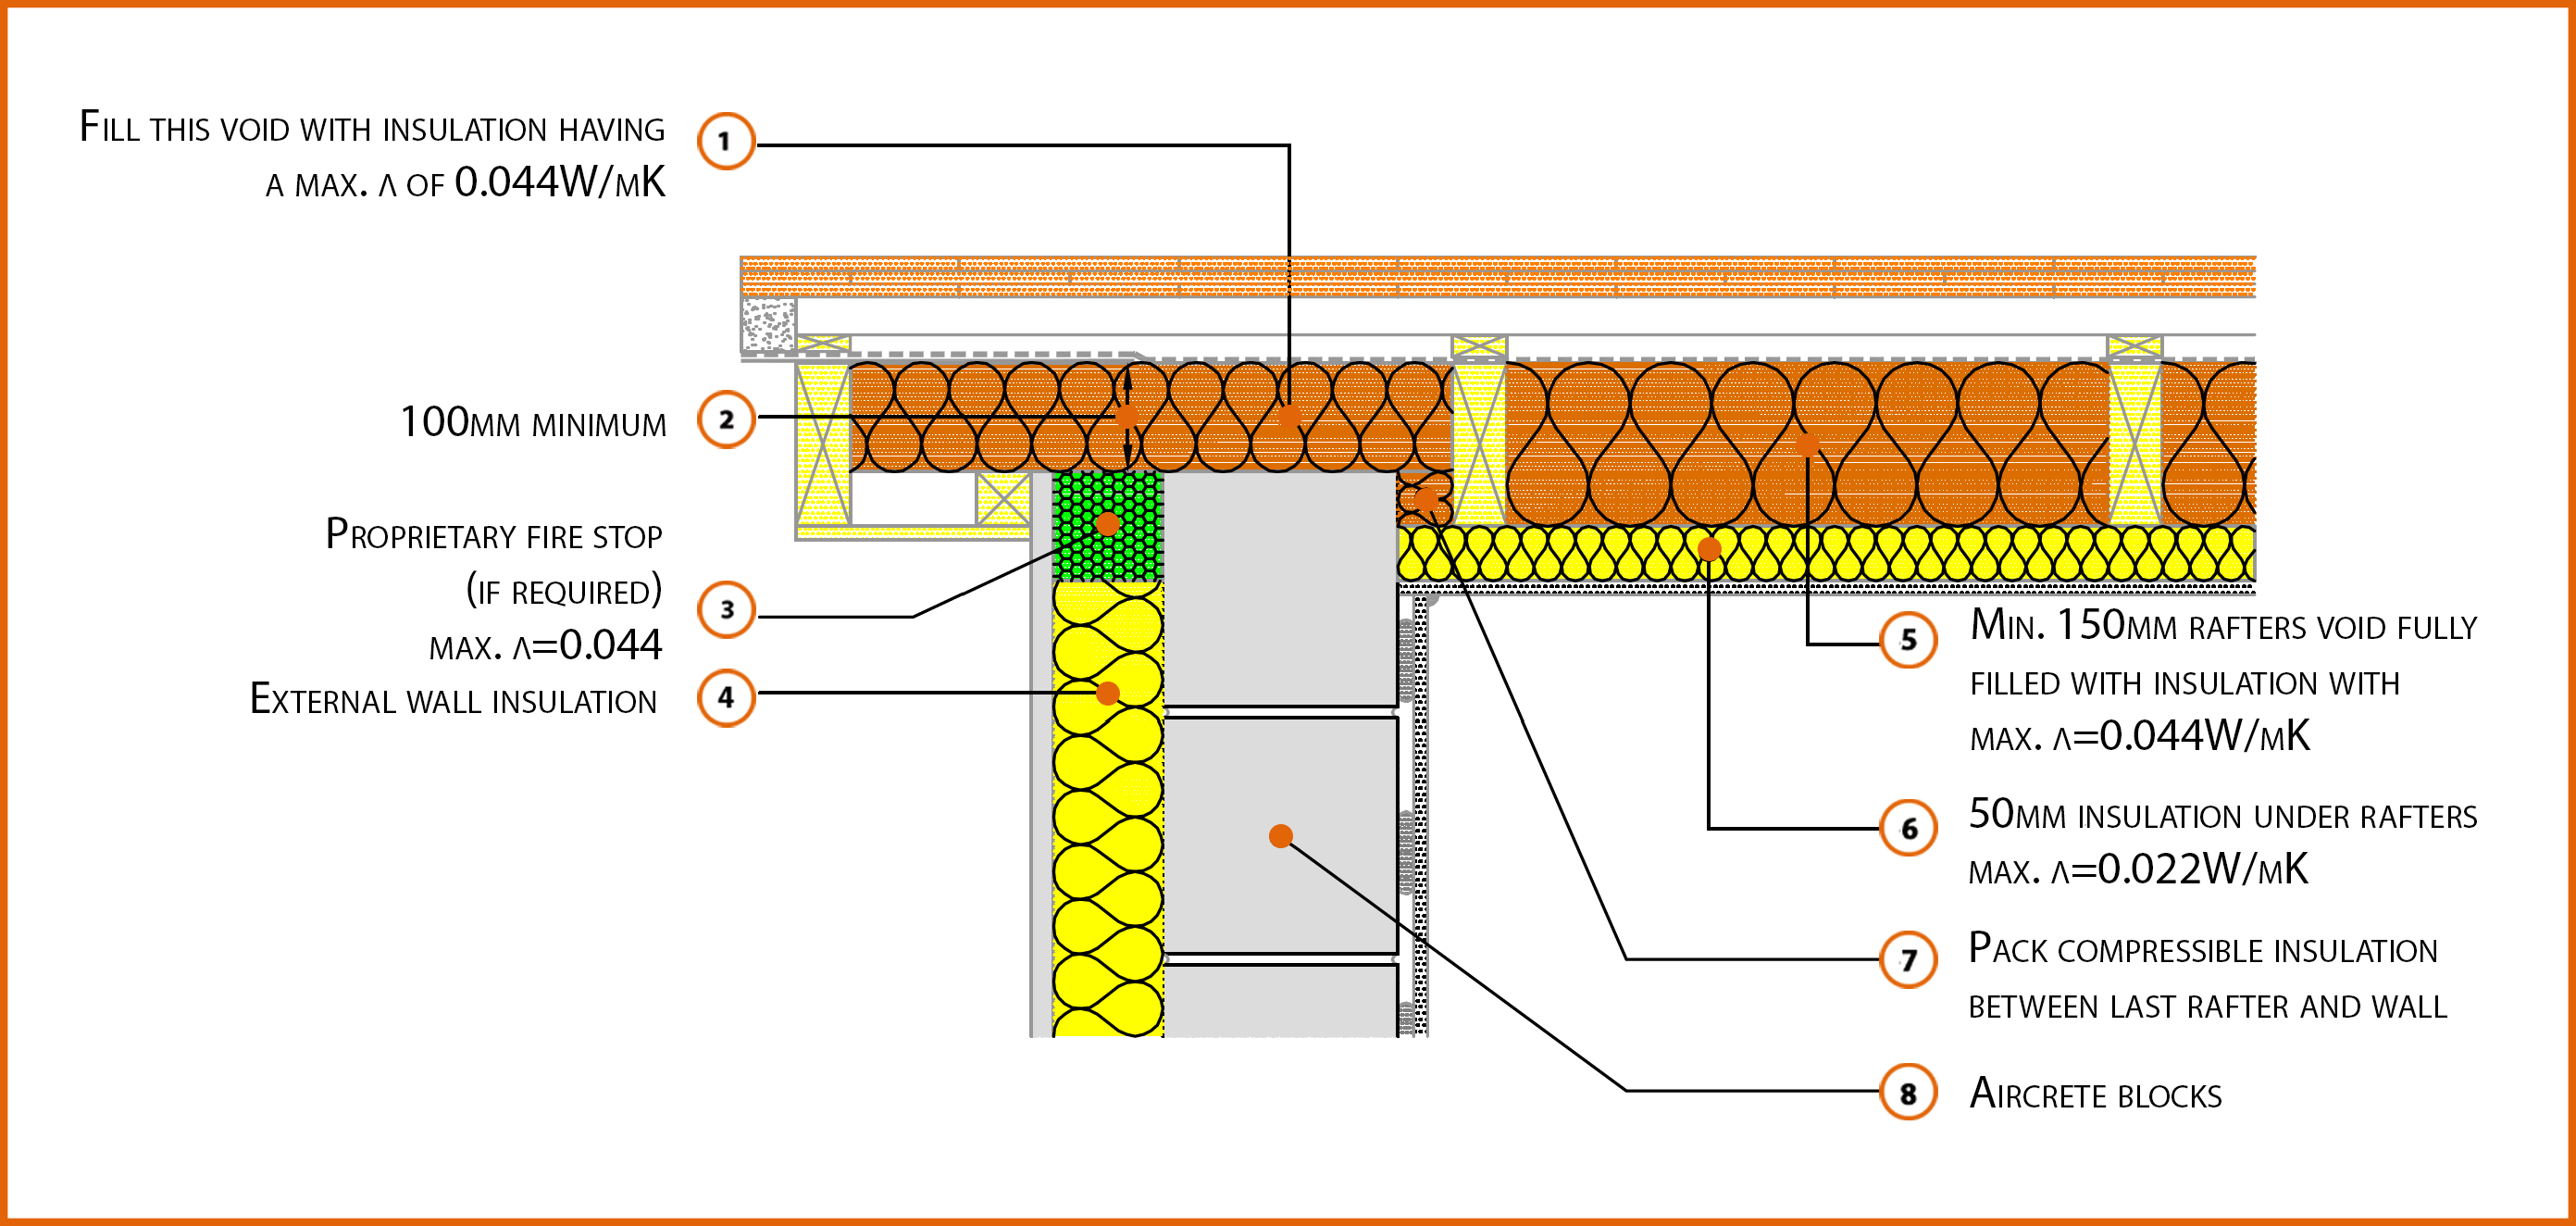 Insulation at Rafter Level